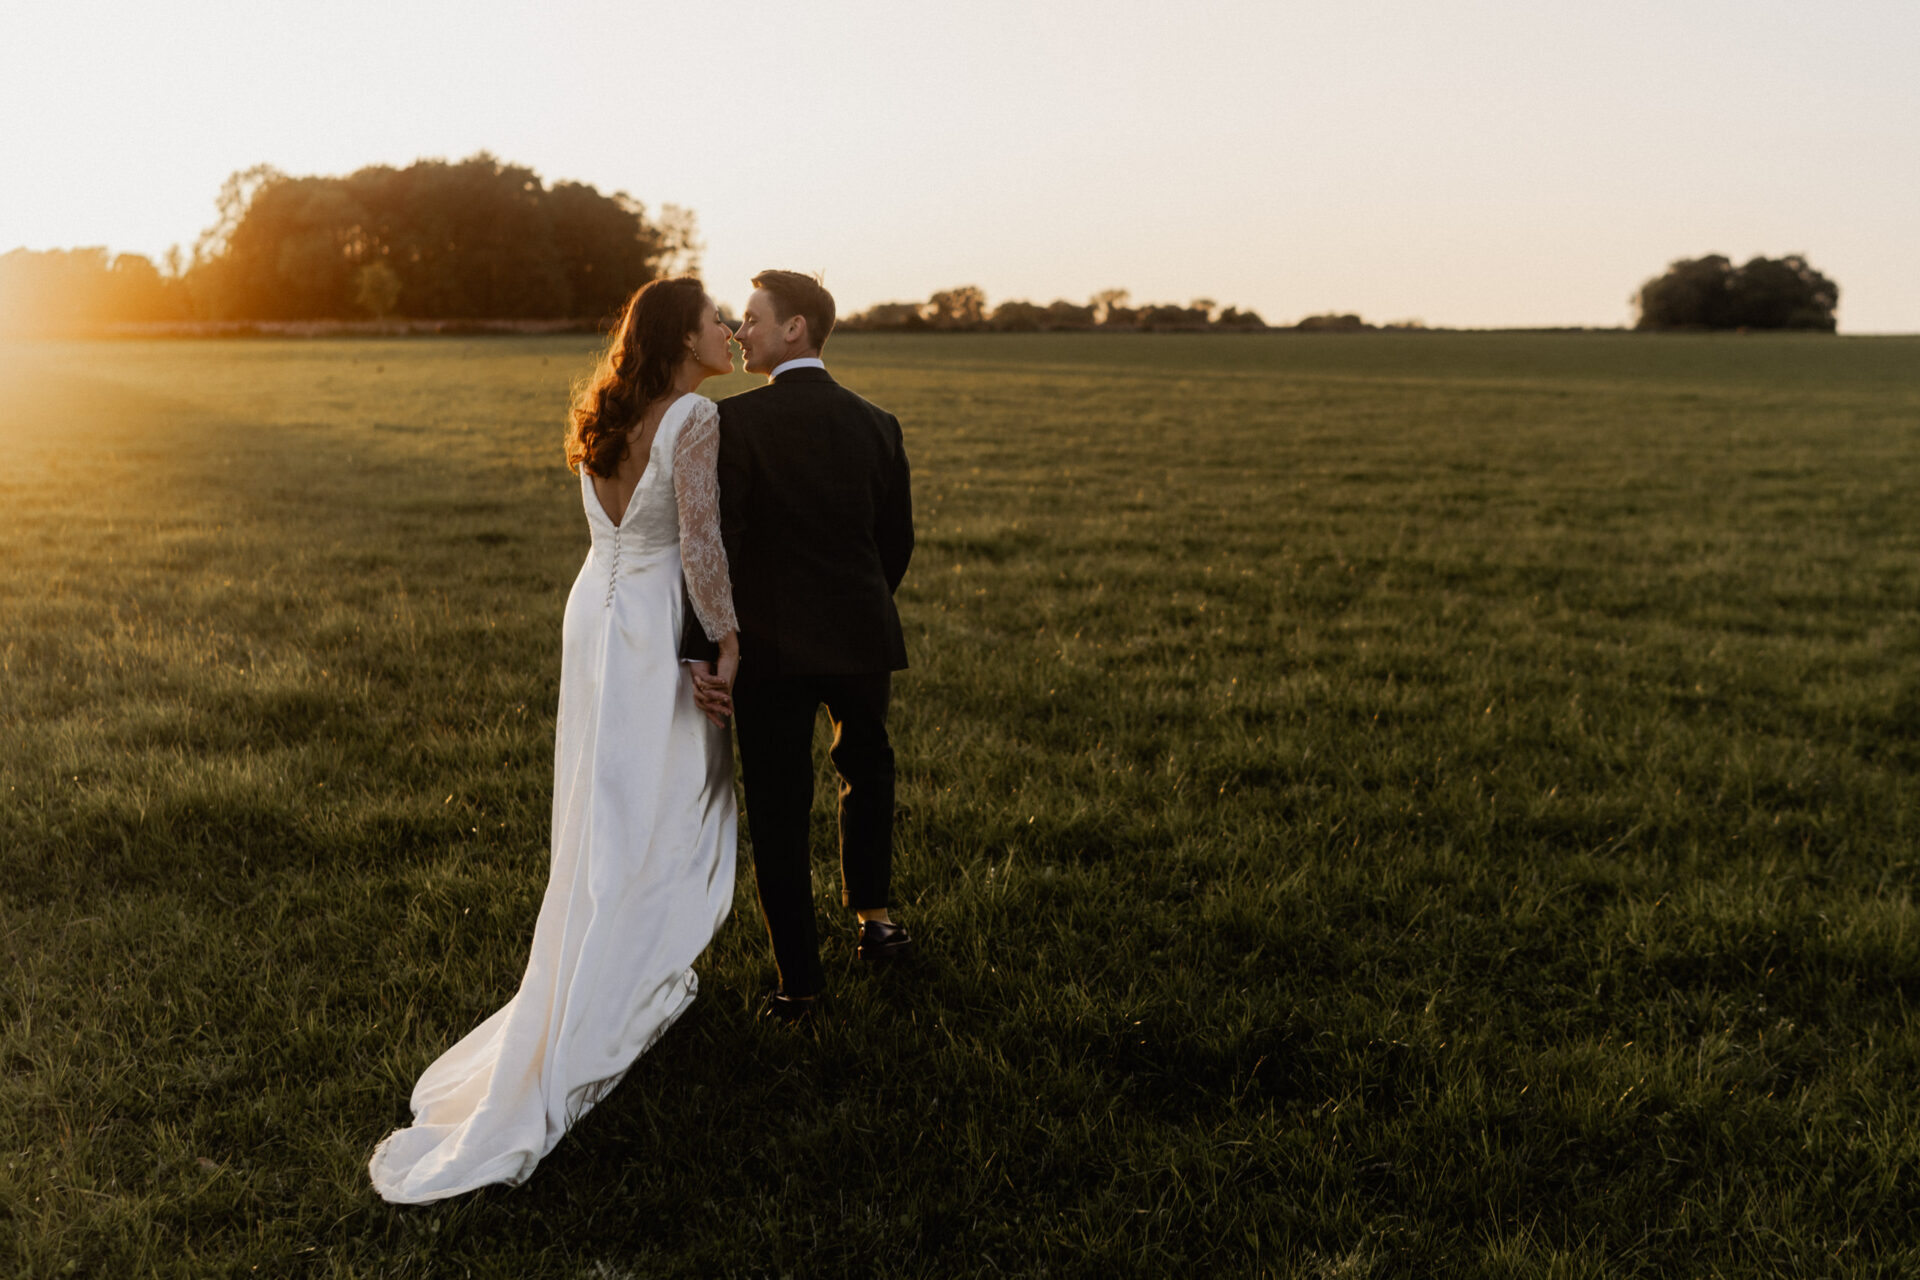 A bride and groom walk hand-in-hand across a green field at sunset. The bride is in a long white dress, and the groom is in a dark suit. This moment from their 2023 wedding photos will probably be one of their favorites.